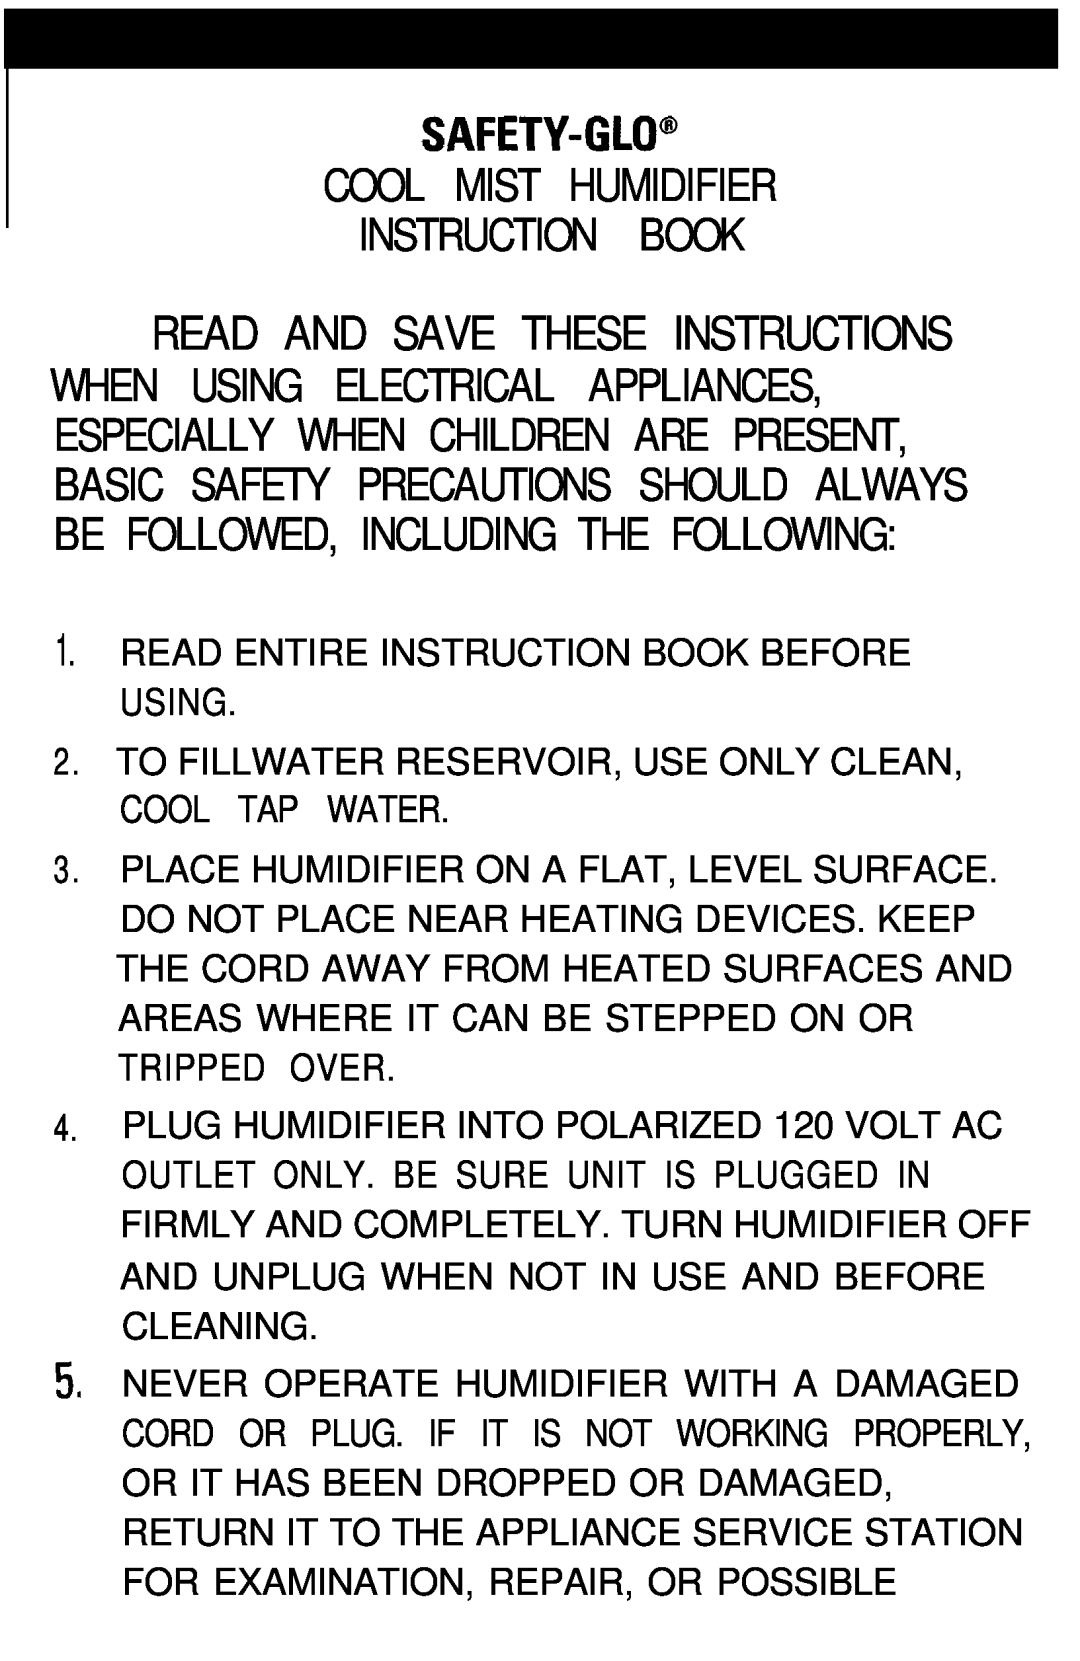 Sunbeam 644, 646 manual Read And Save These Instructions, Safety-Glob Cool Mist Humidifier Instruction Book 